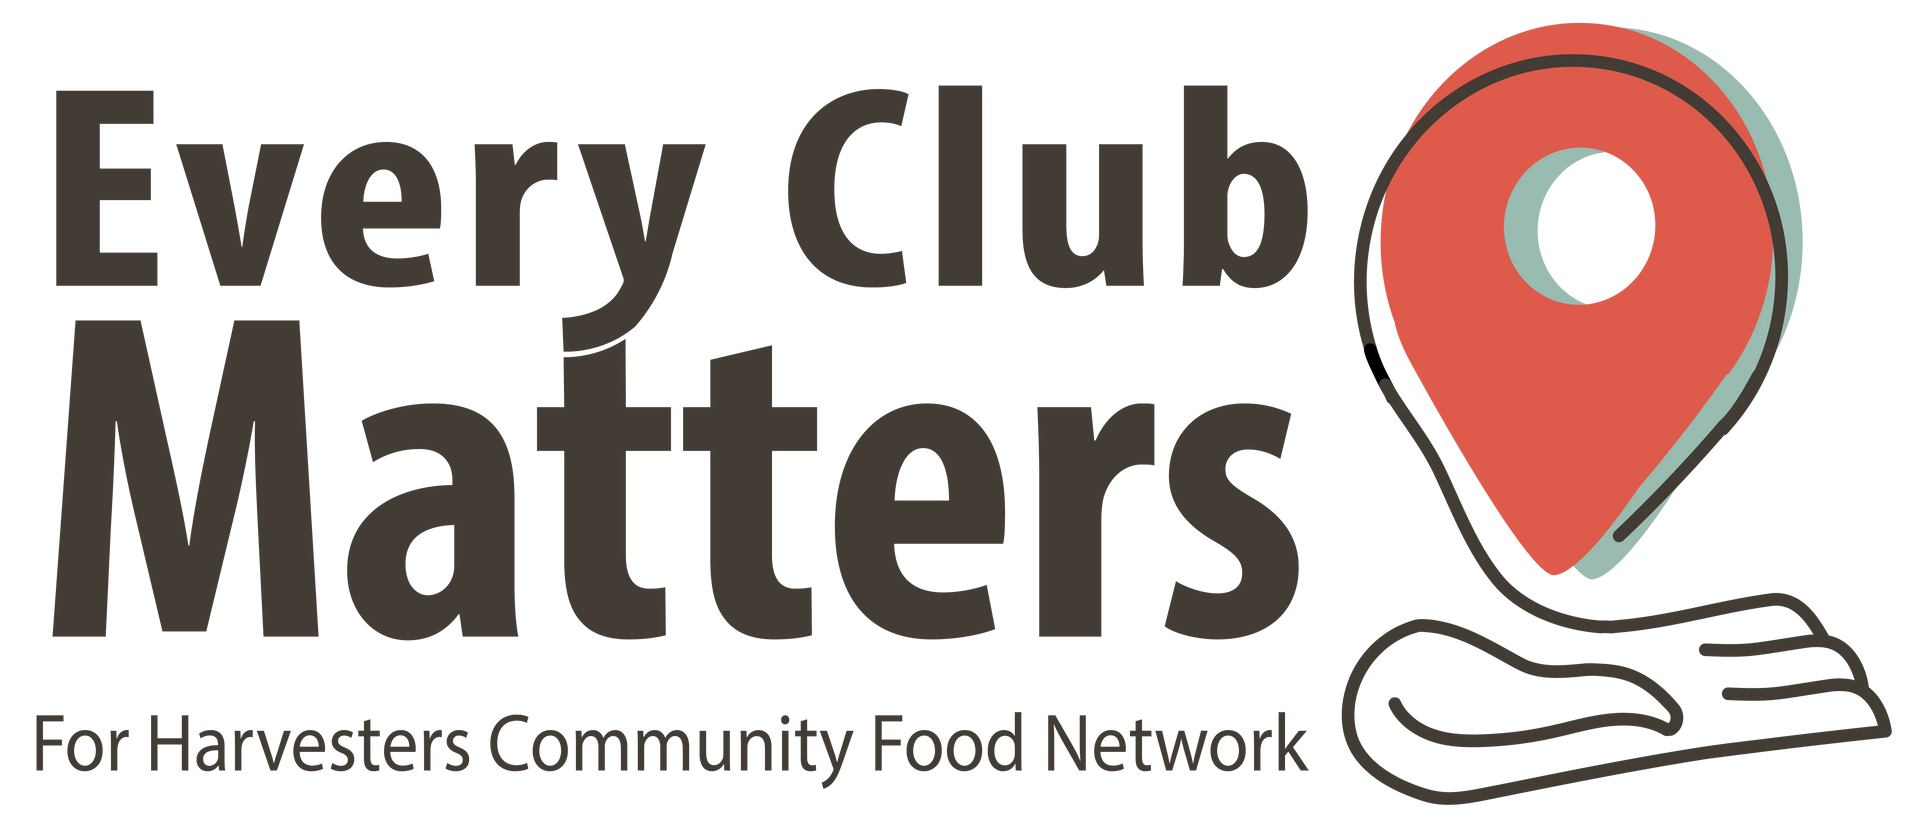 Every Club Matters for Harvesters Community Food Network